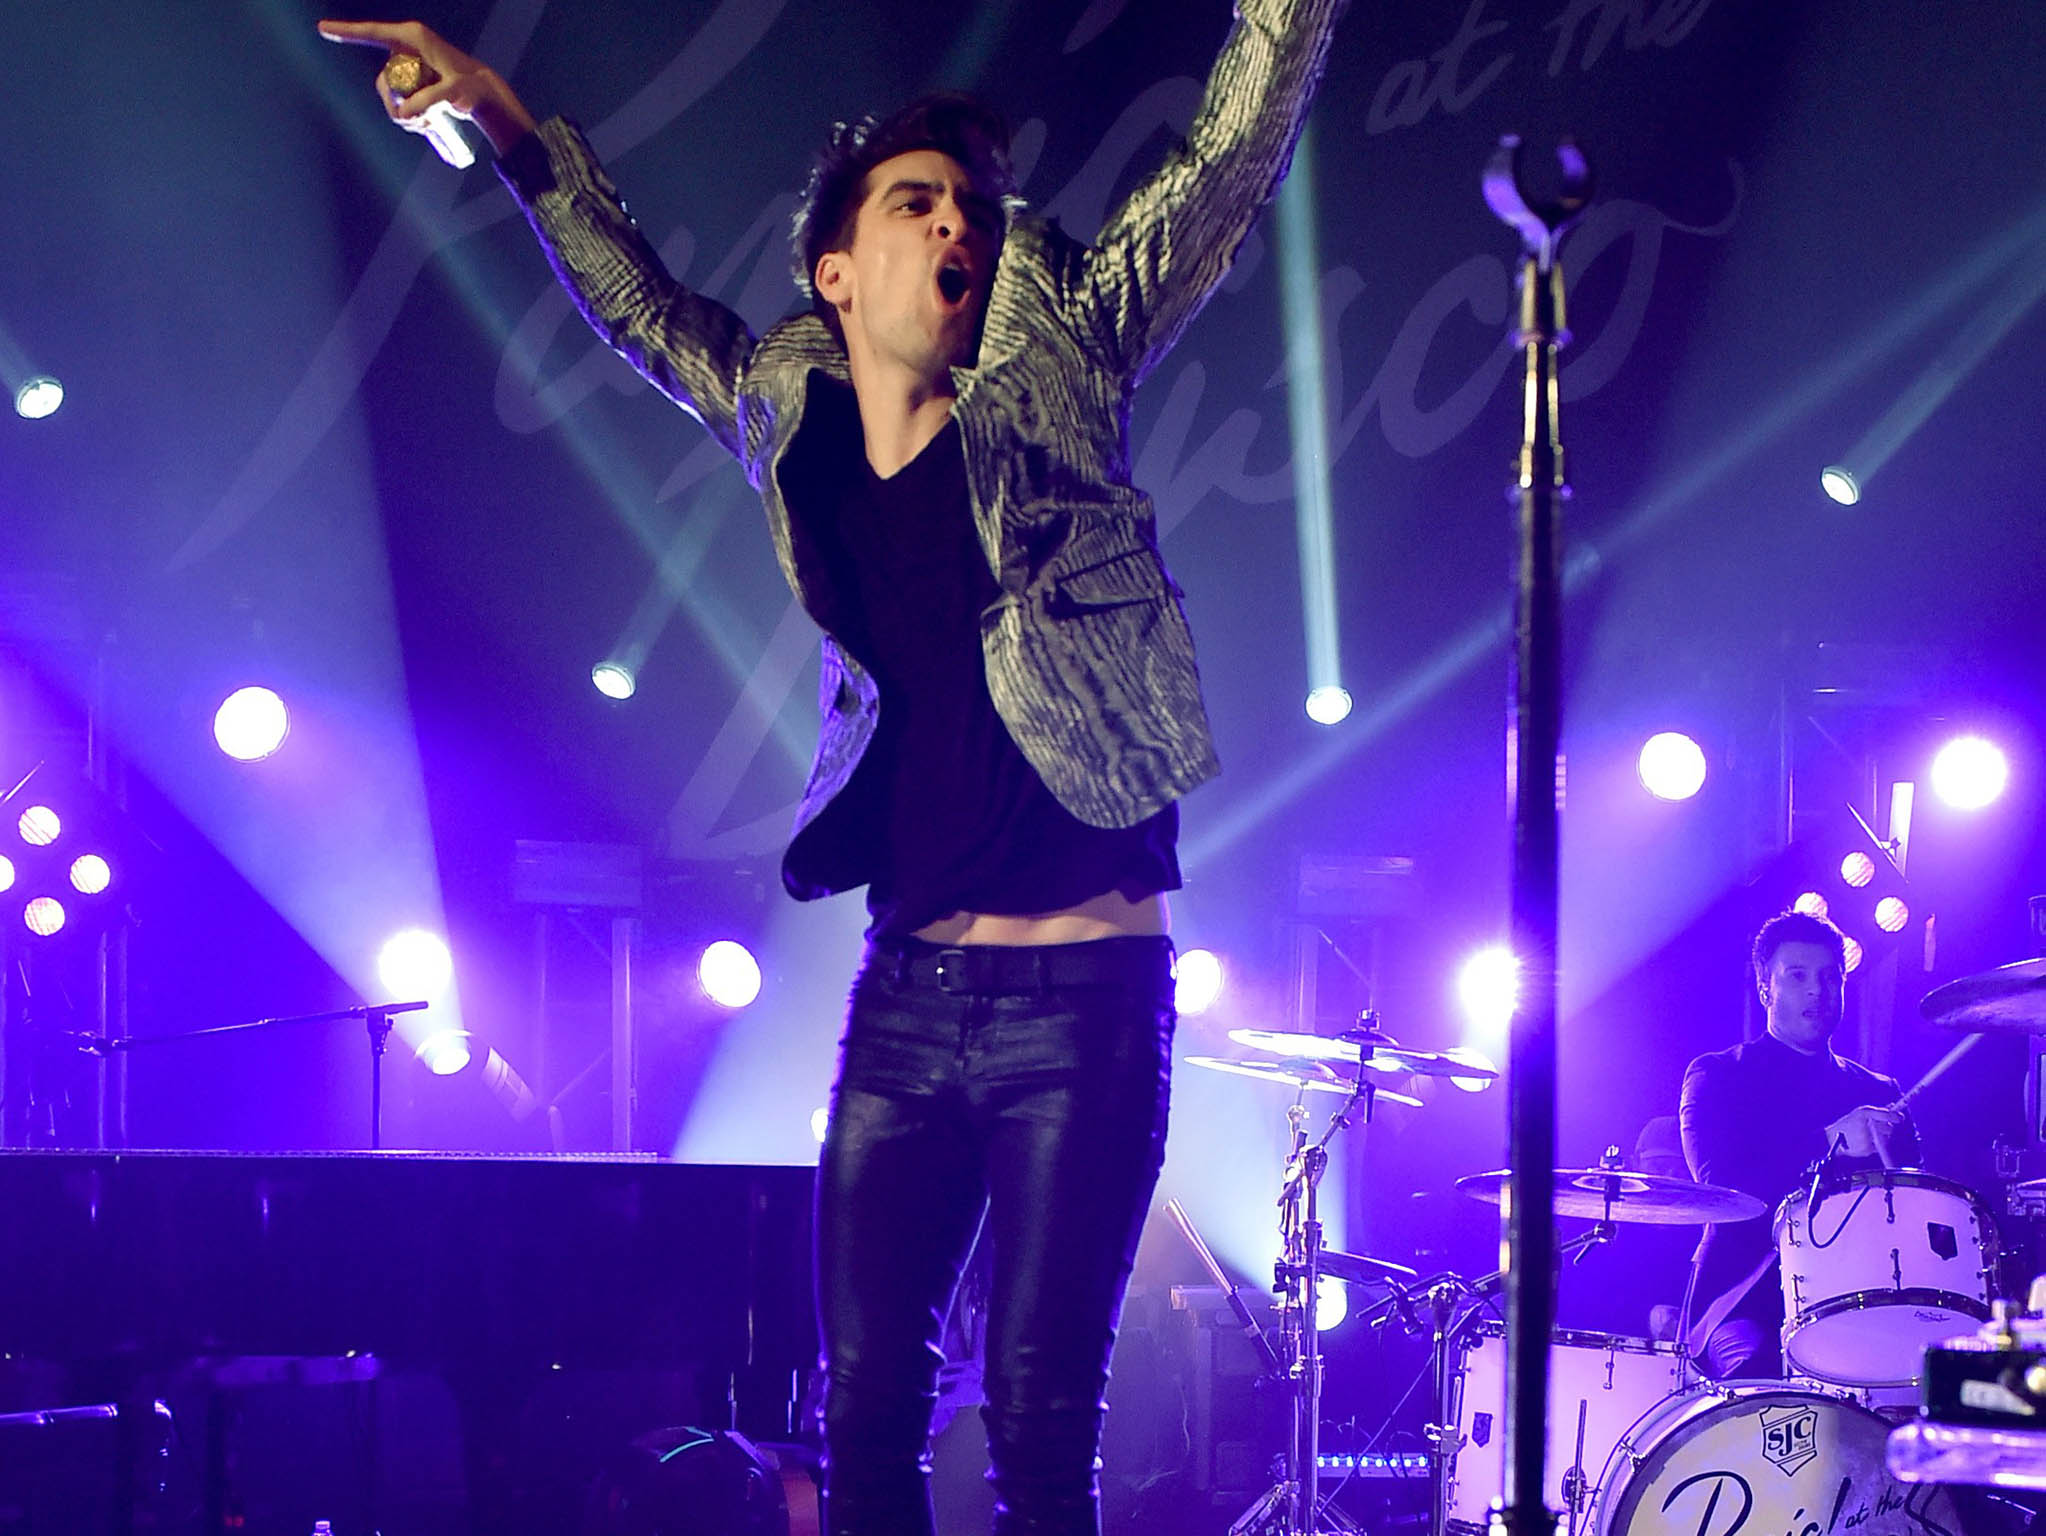 Brendon Urie of Panic! at the Disco. Credit: Getty